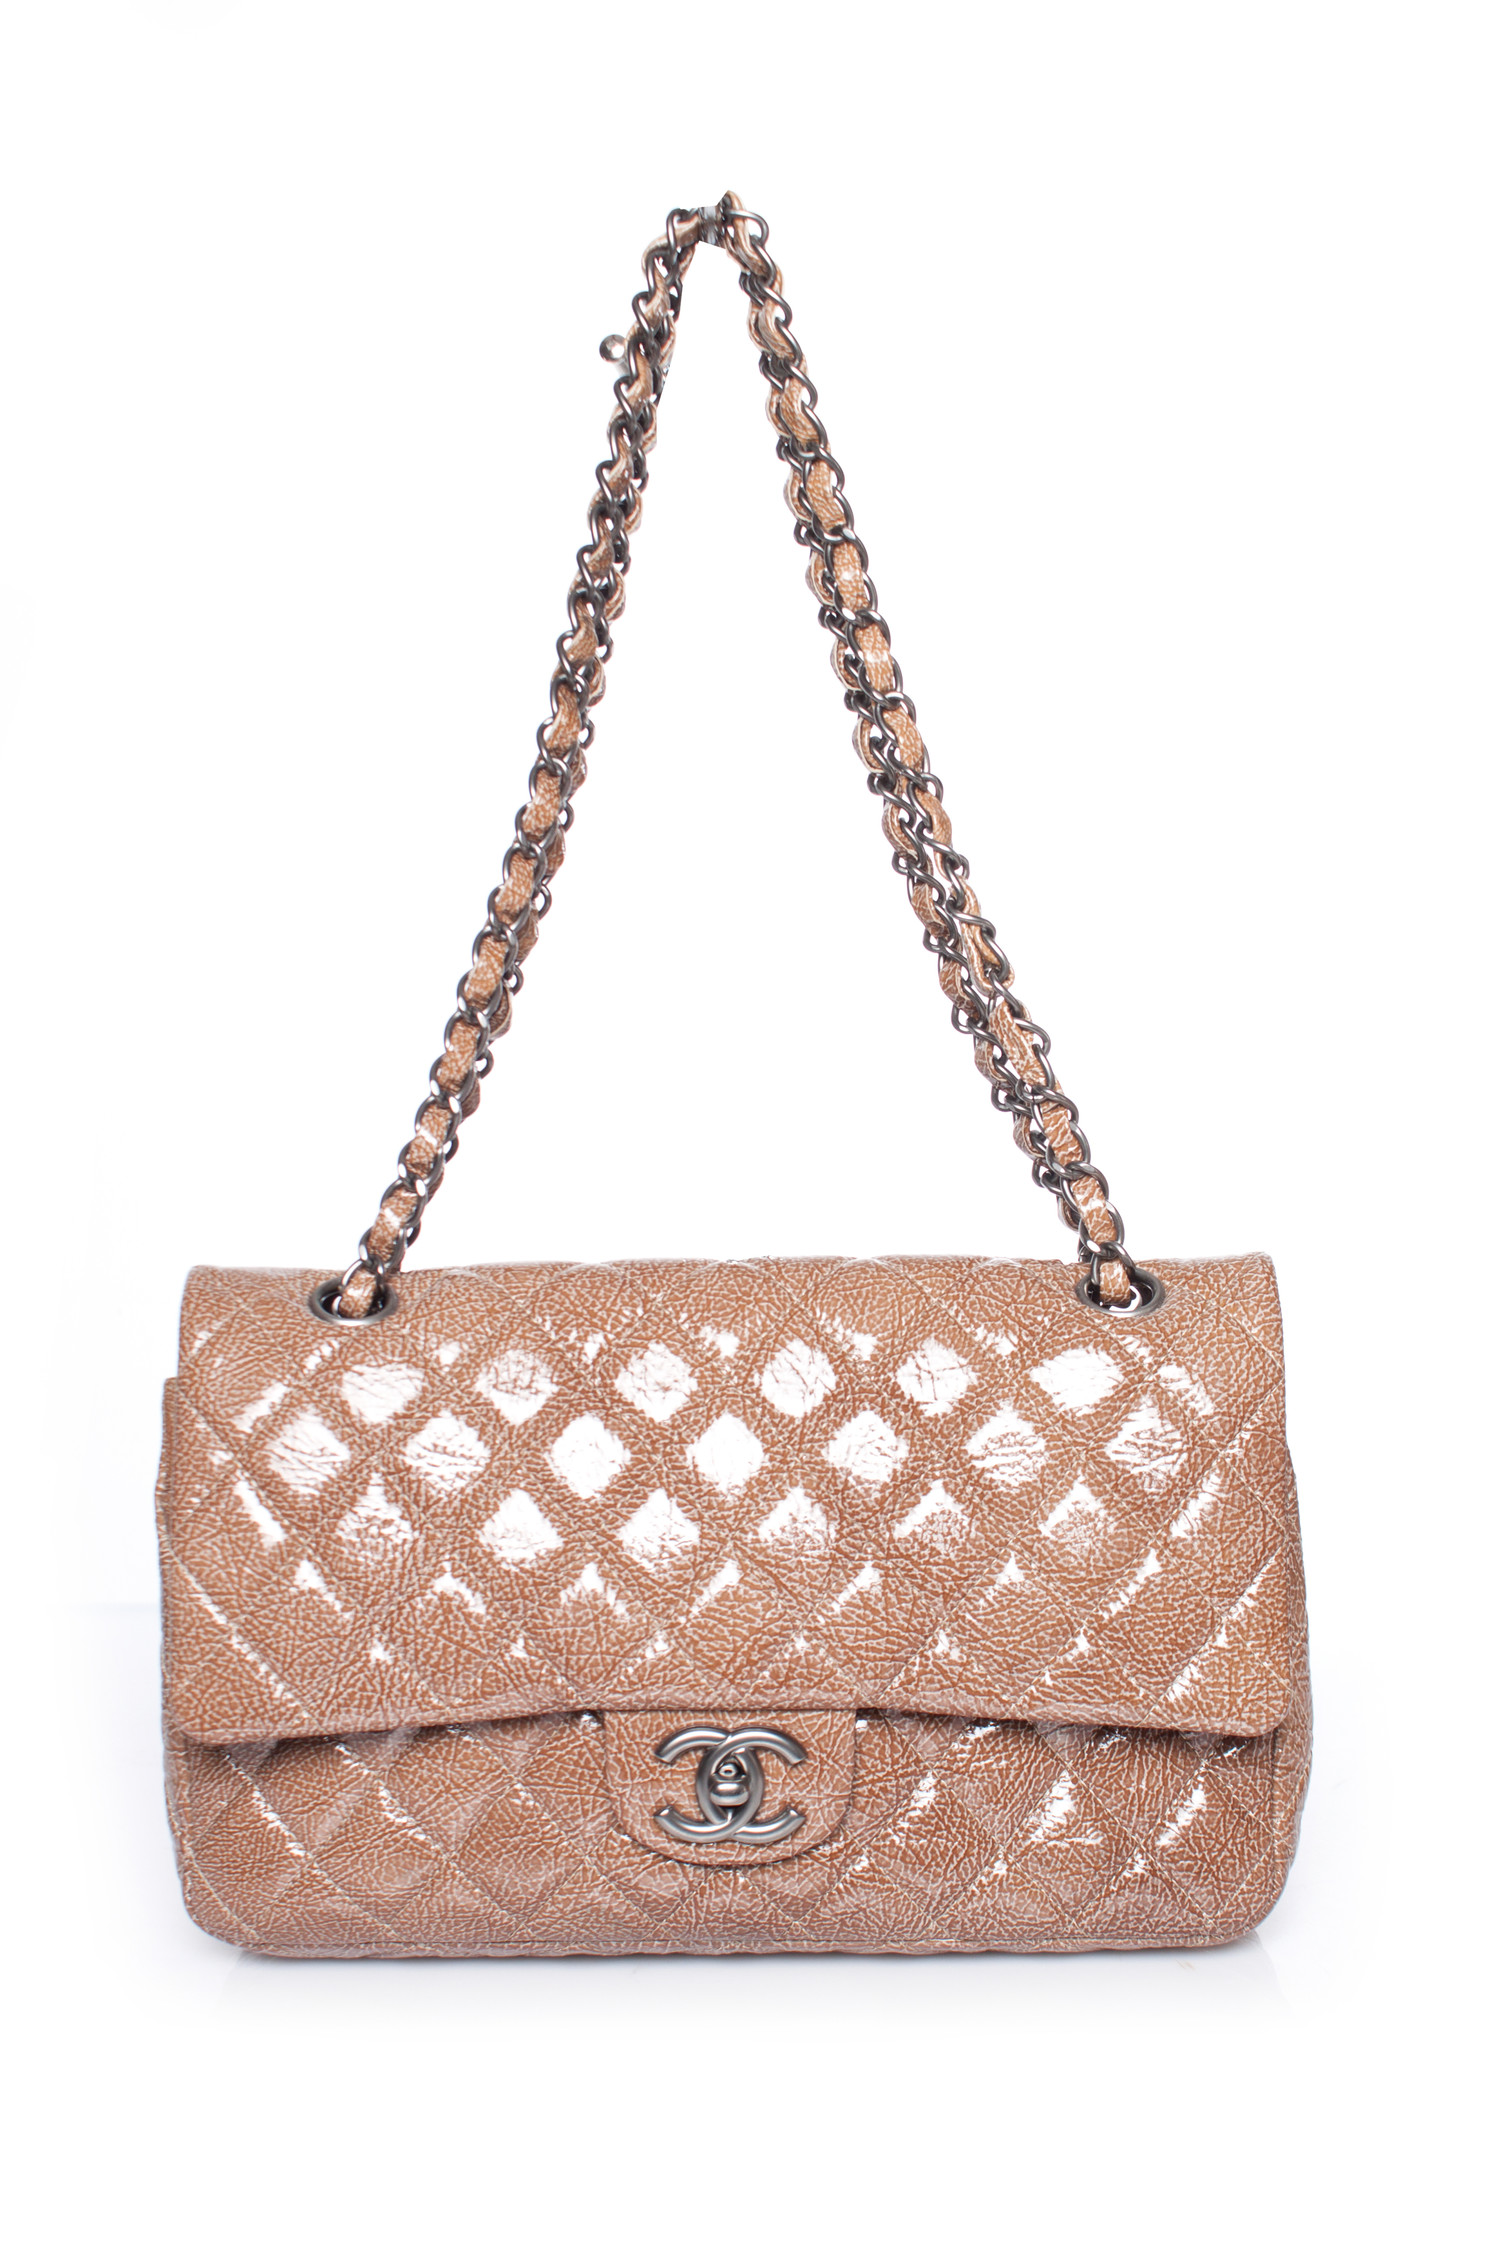 Chanel, Beige Quilted Crinkled Patent Leather Classic Medium